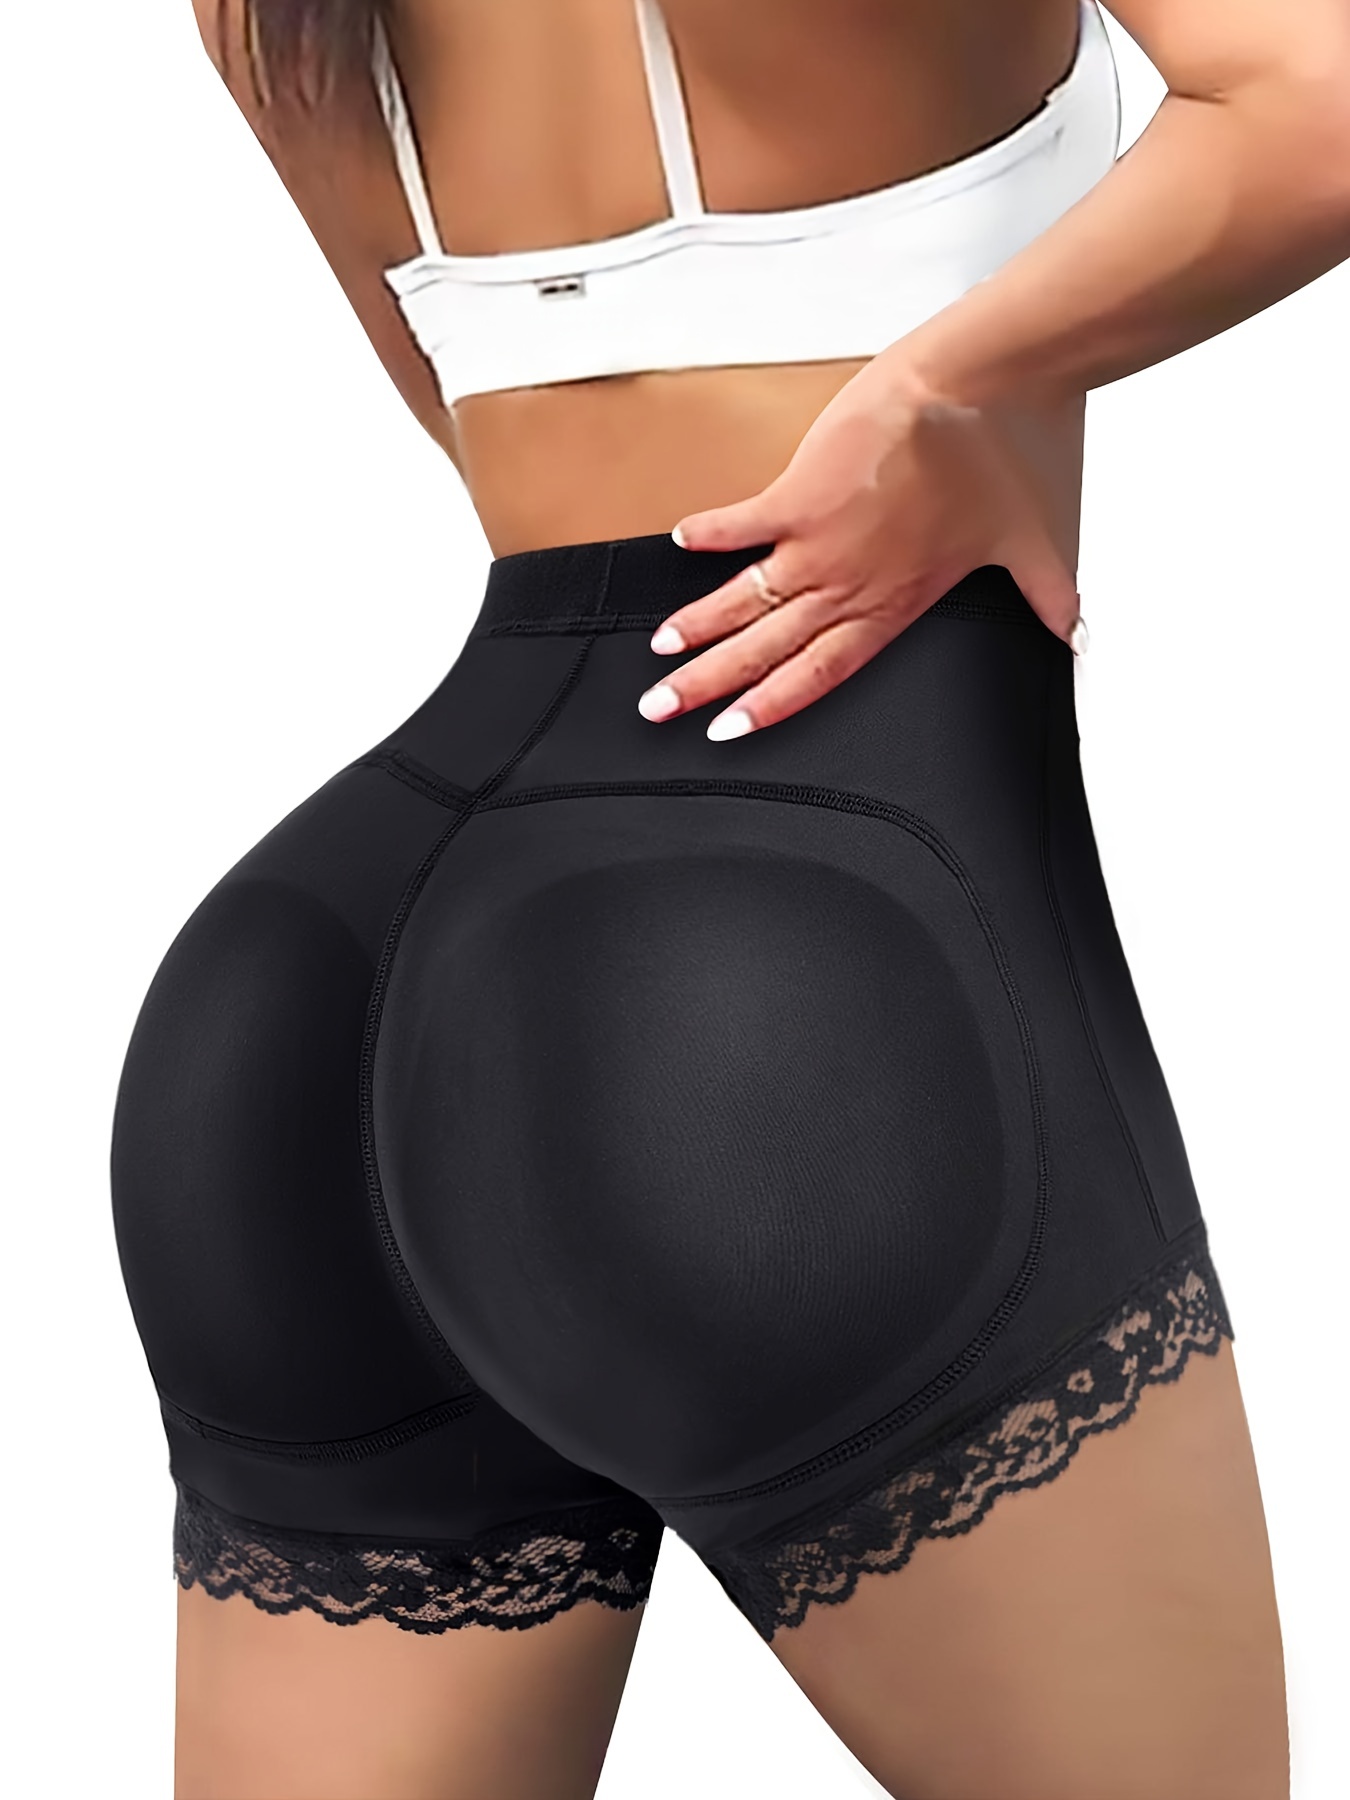 Waist Trainer Shorts for Women Tummy Control Body Shaping High Waist Corset  Shorts with Pockets